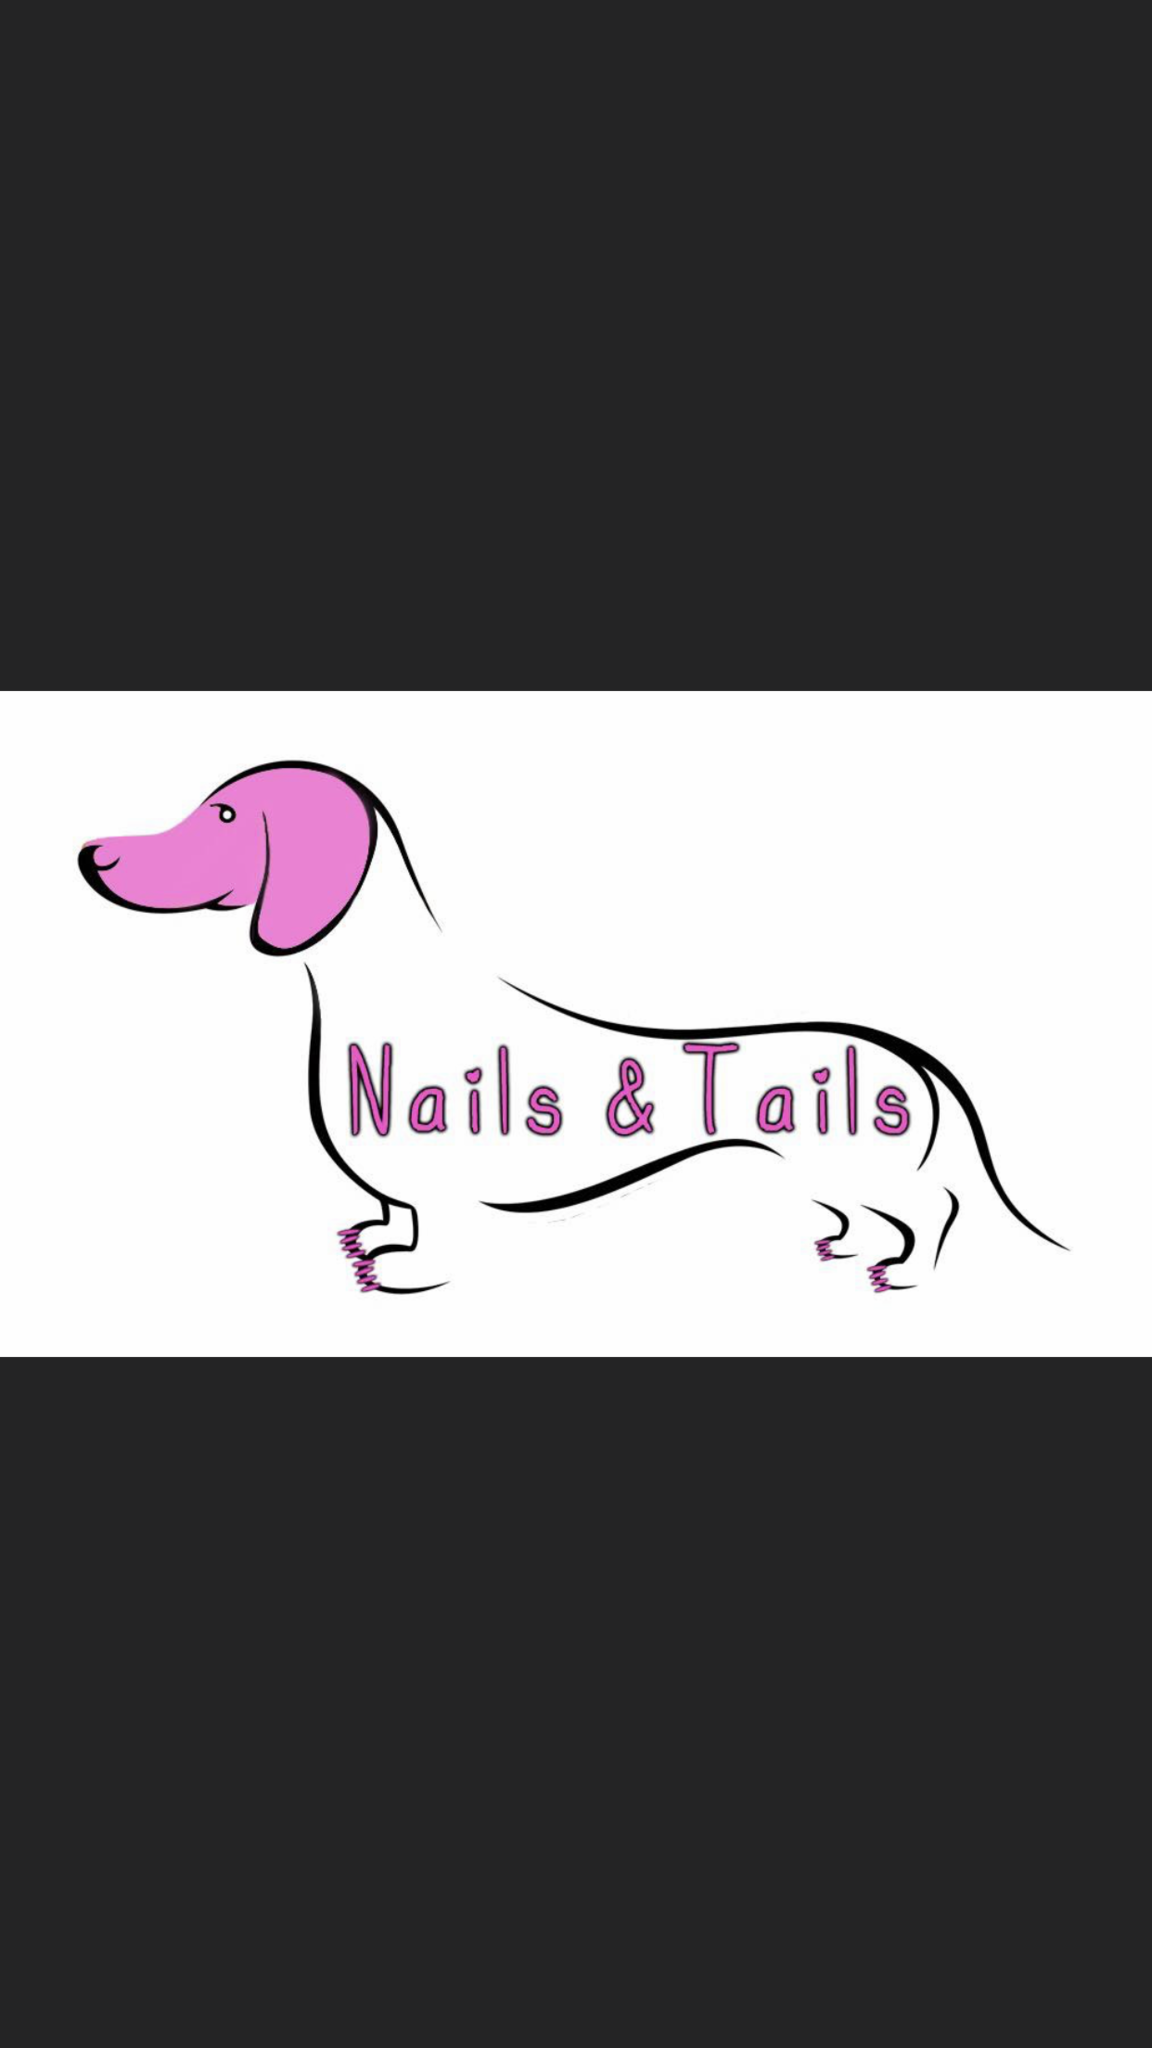 Nails & Tails Pet Grooming | Pet groomer in Morris, IL